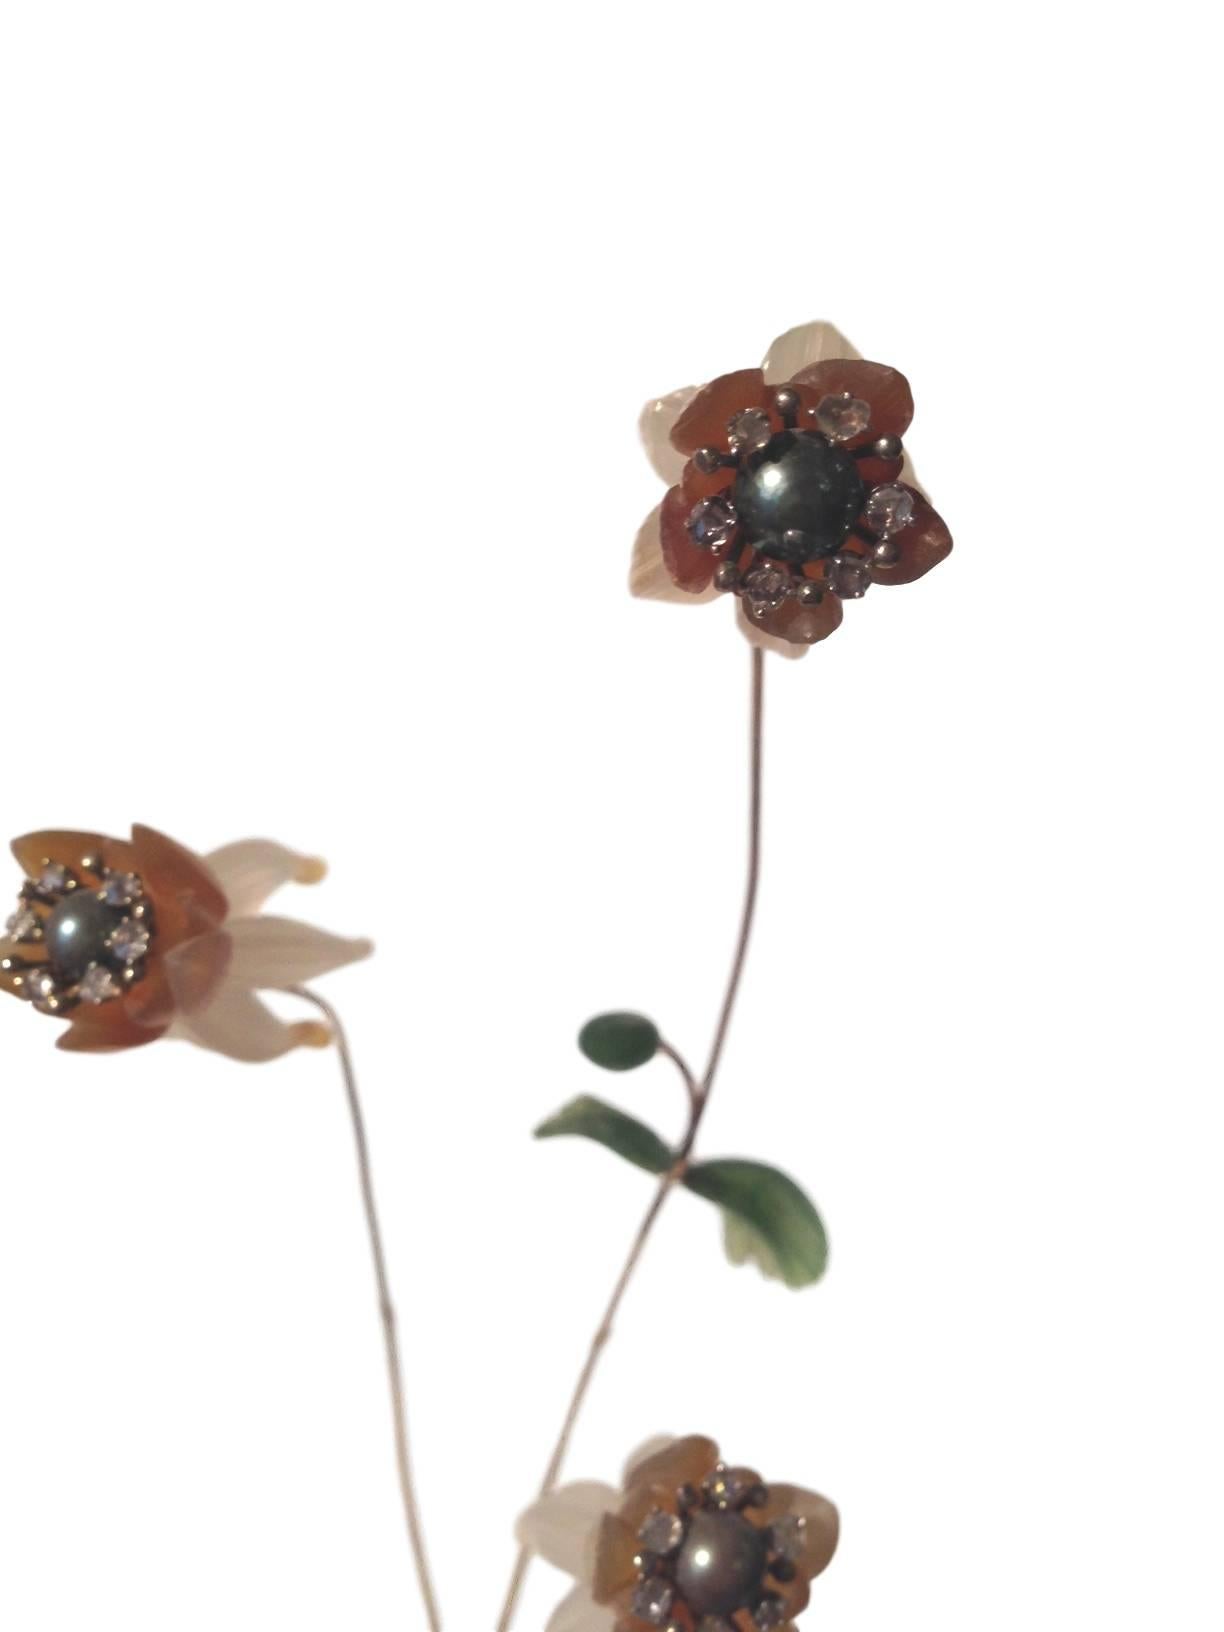 A very special and delicate Russian hardstone and jeweled flower study from the 20th century. The rock crystal base issuing three delicate flowers fashioned from quartz and cut diamonds is attached to a gilt bronze stem with nephrite leaves. This